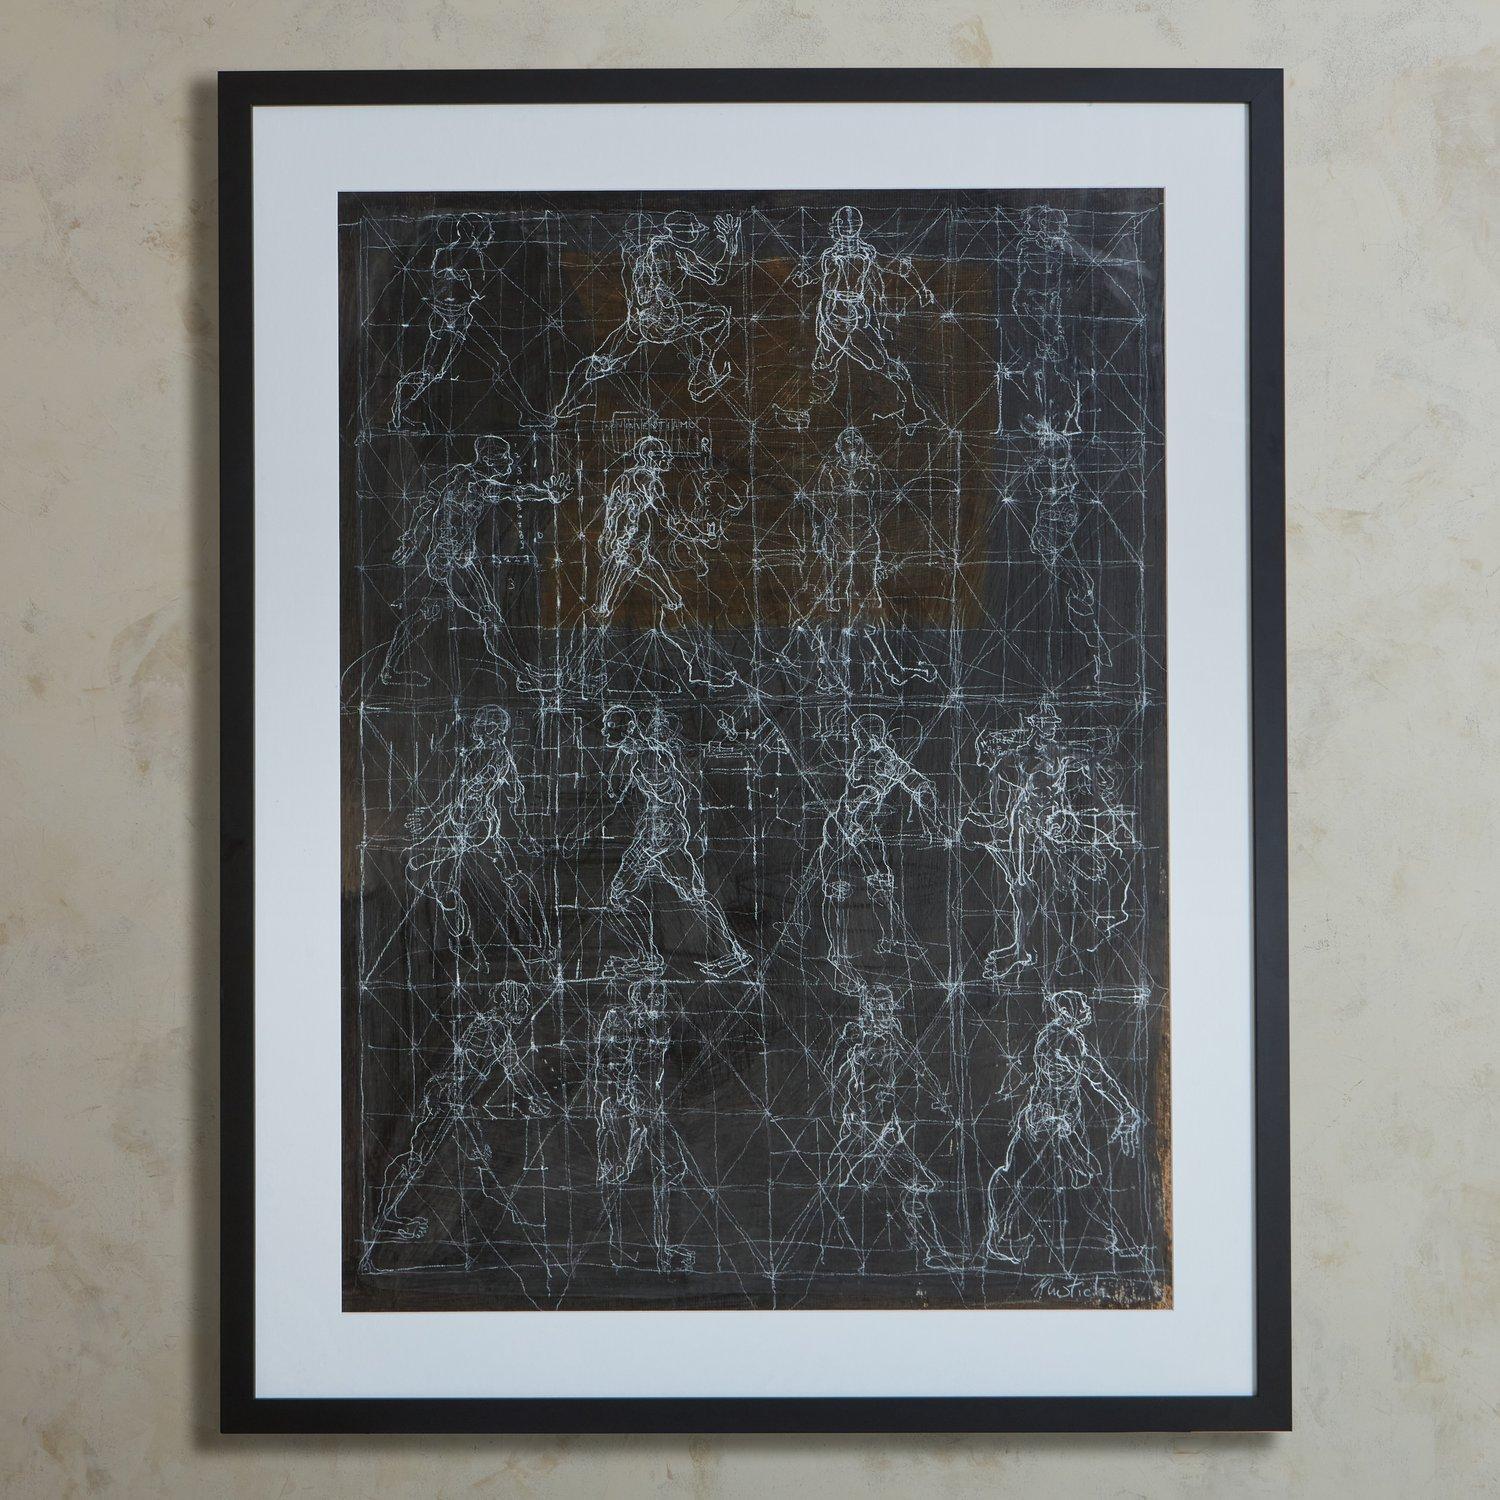 A contemporary abstract mixed media drawing on paper by Italian artist Giancarlo Mustich. This piece was professionally framed in a black wood frame with a white mat. Signed lower right. Sourced in Italy.